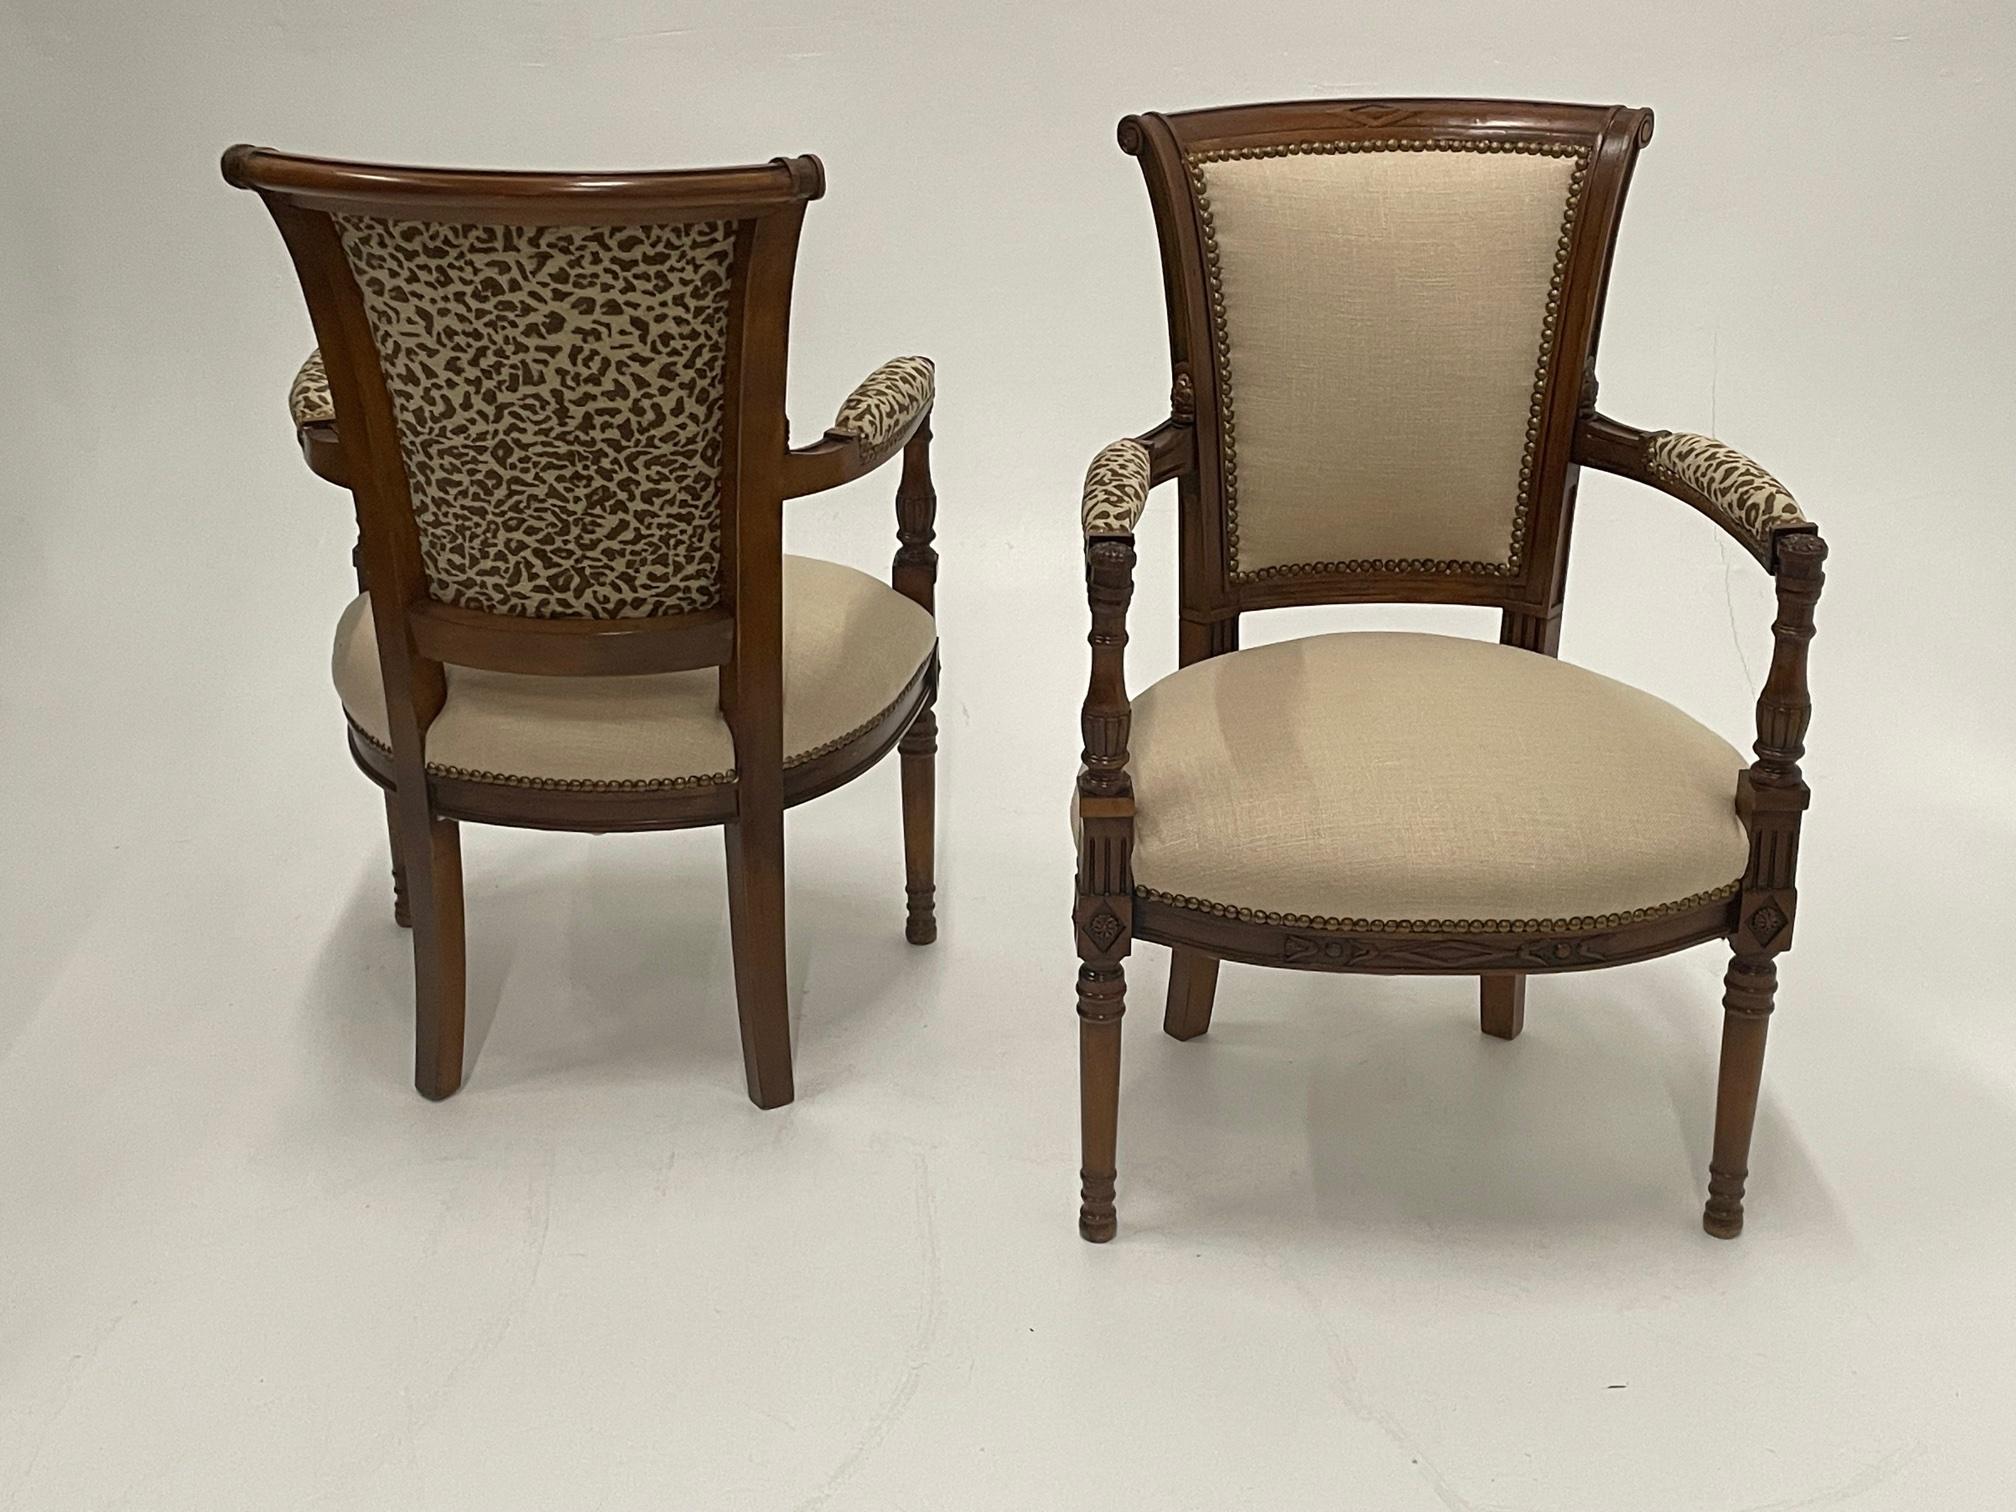 Superbly Stylish Pair of Carved Walnut Armchairs Upholstered in Linen & Leopard For Sale 5